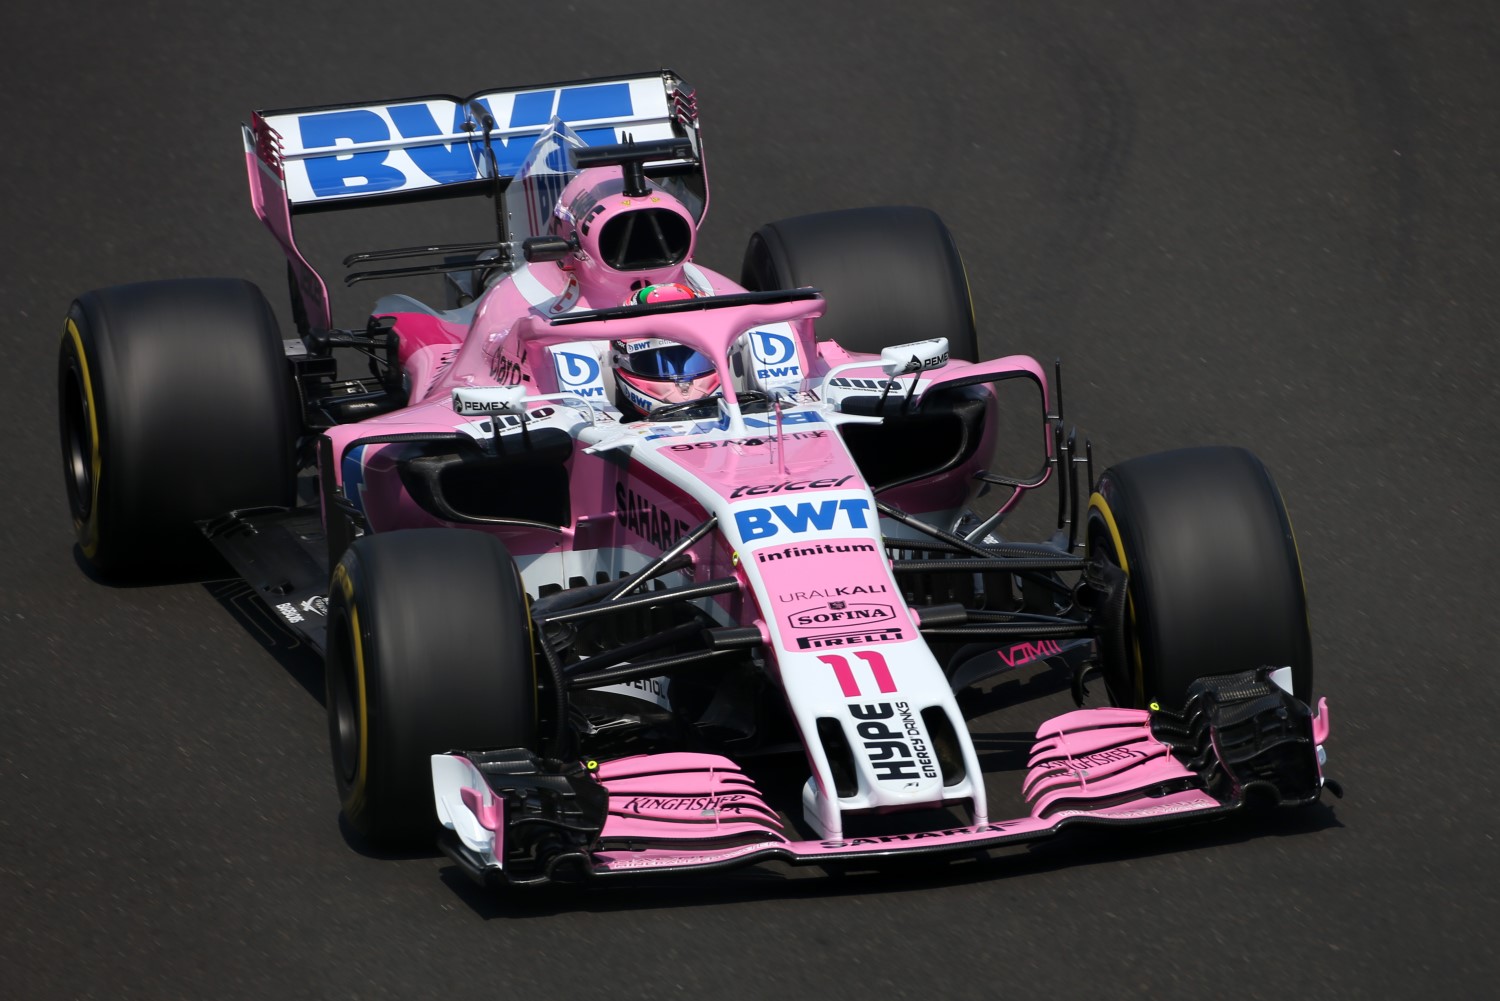 Perez forces team into bankruptcy